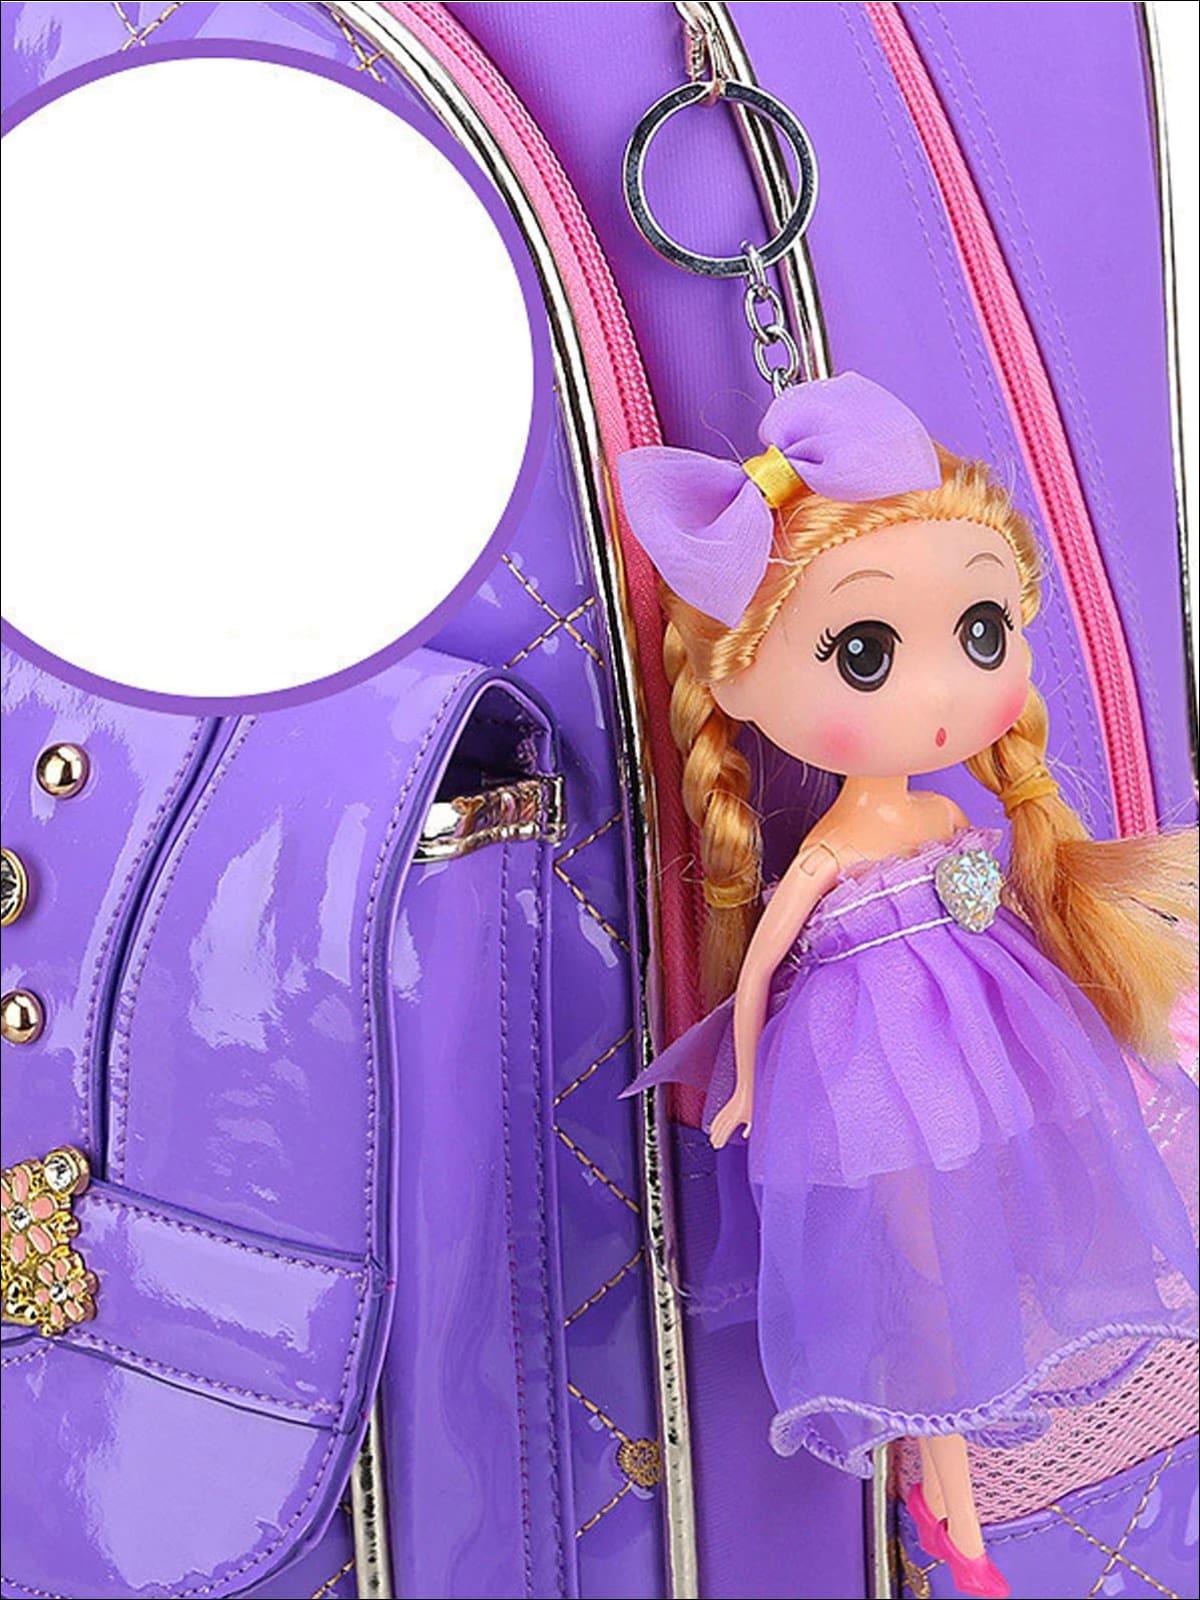 Girls Quilted Patent Synthetic Leather Backpack - Back To School Accessories - Mia Belle Girls